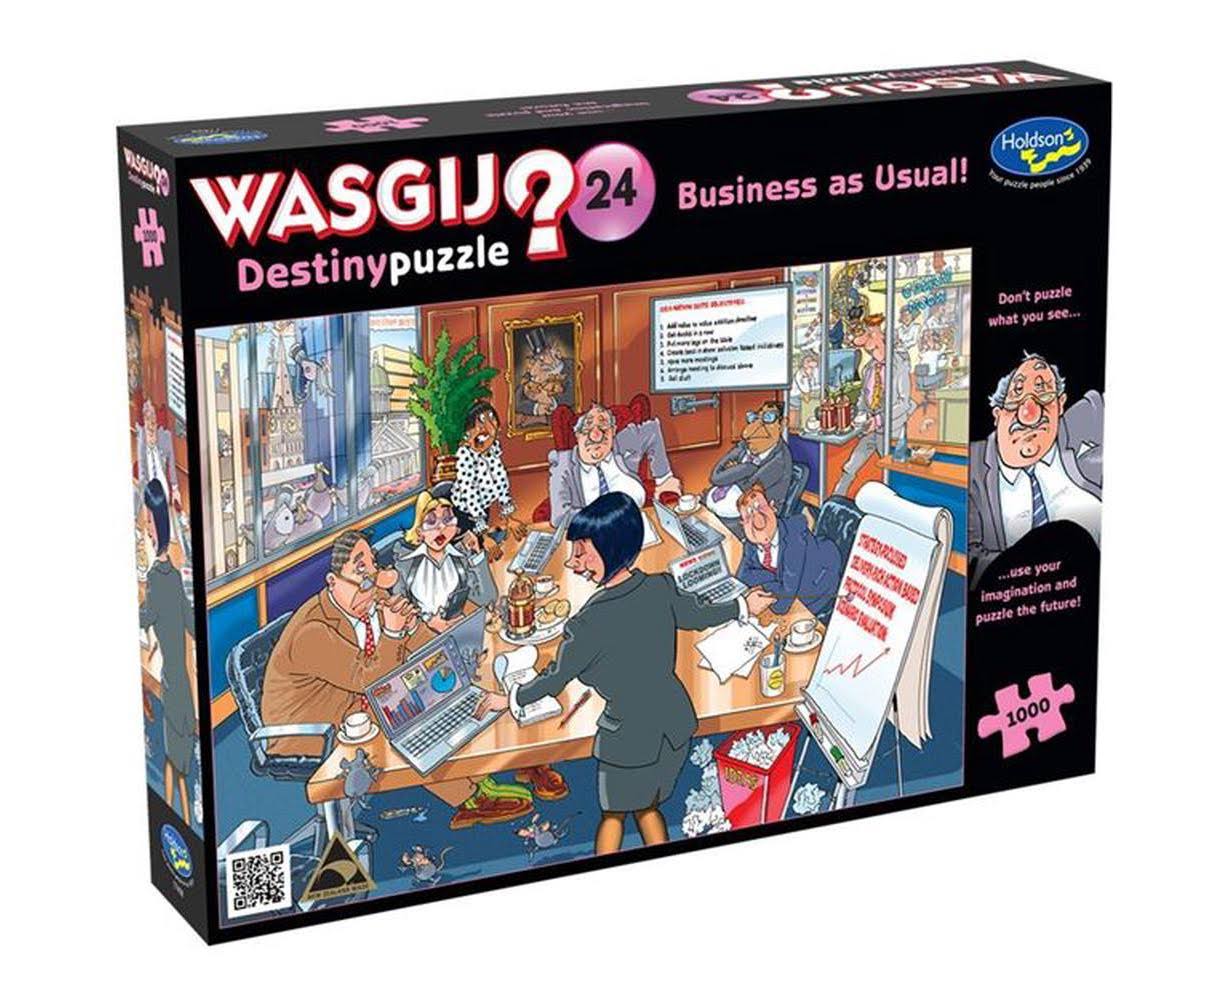 Wasgij Destiny 24 Business As Usual